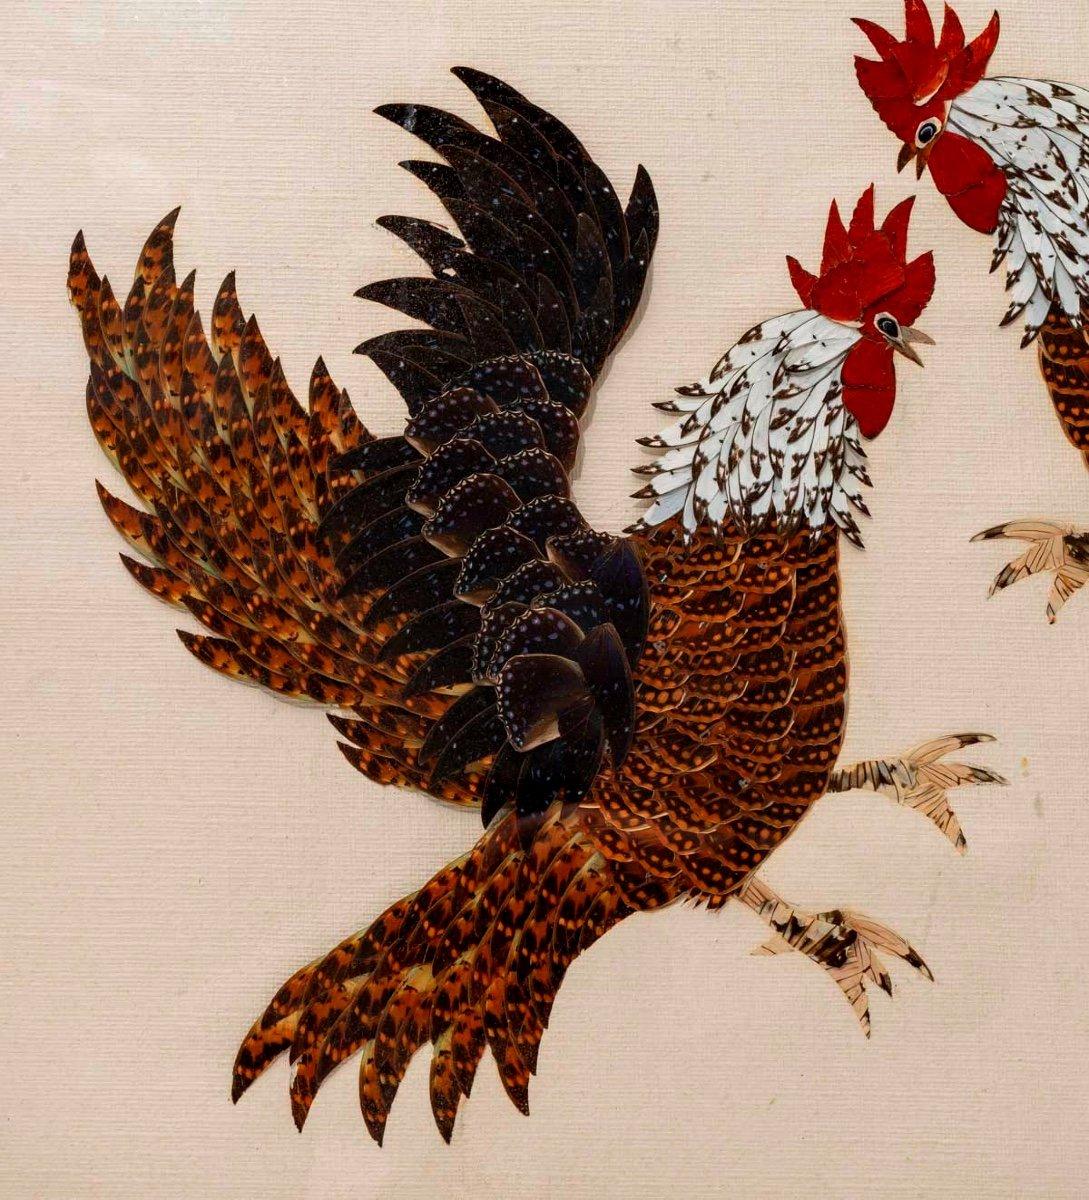 Other Table Feathers Glued On Canvas - Cockfight - Japan - Period: Early 20th Century For Sale